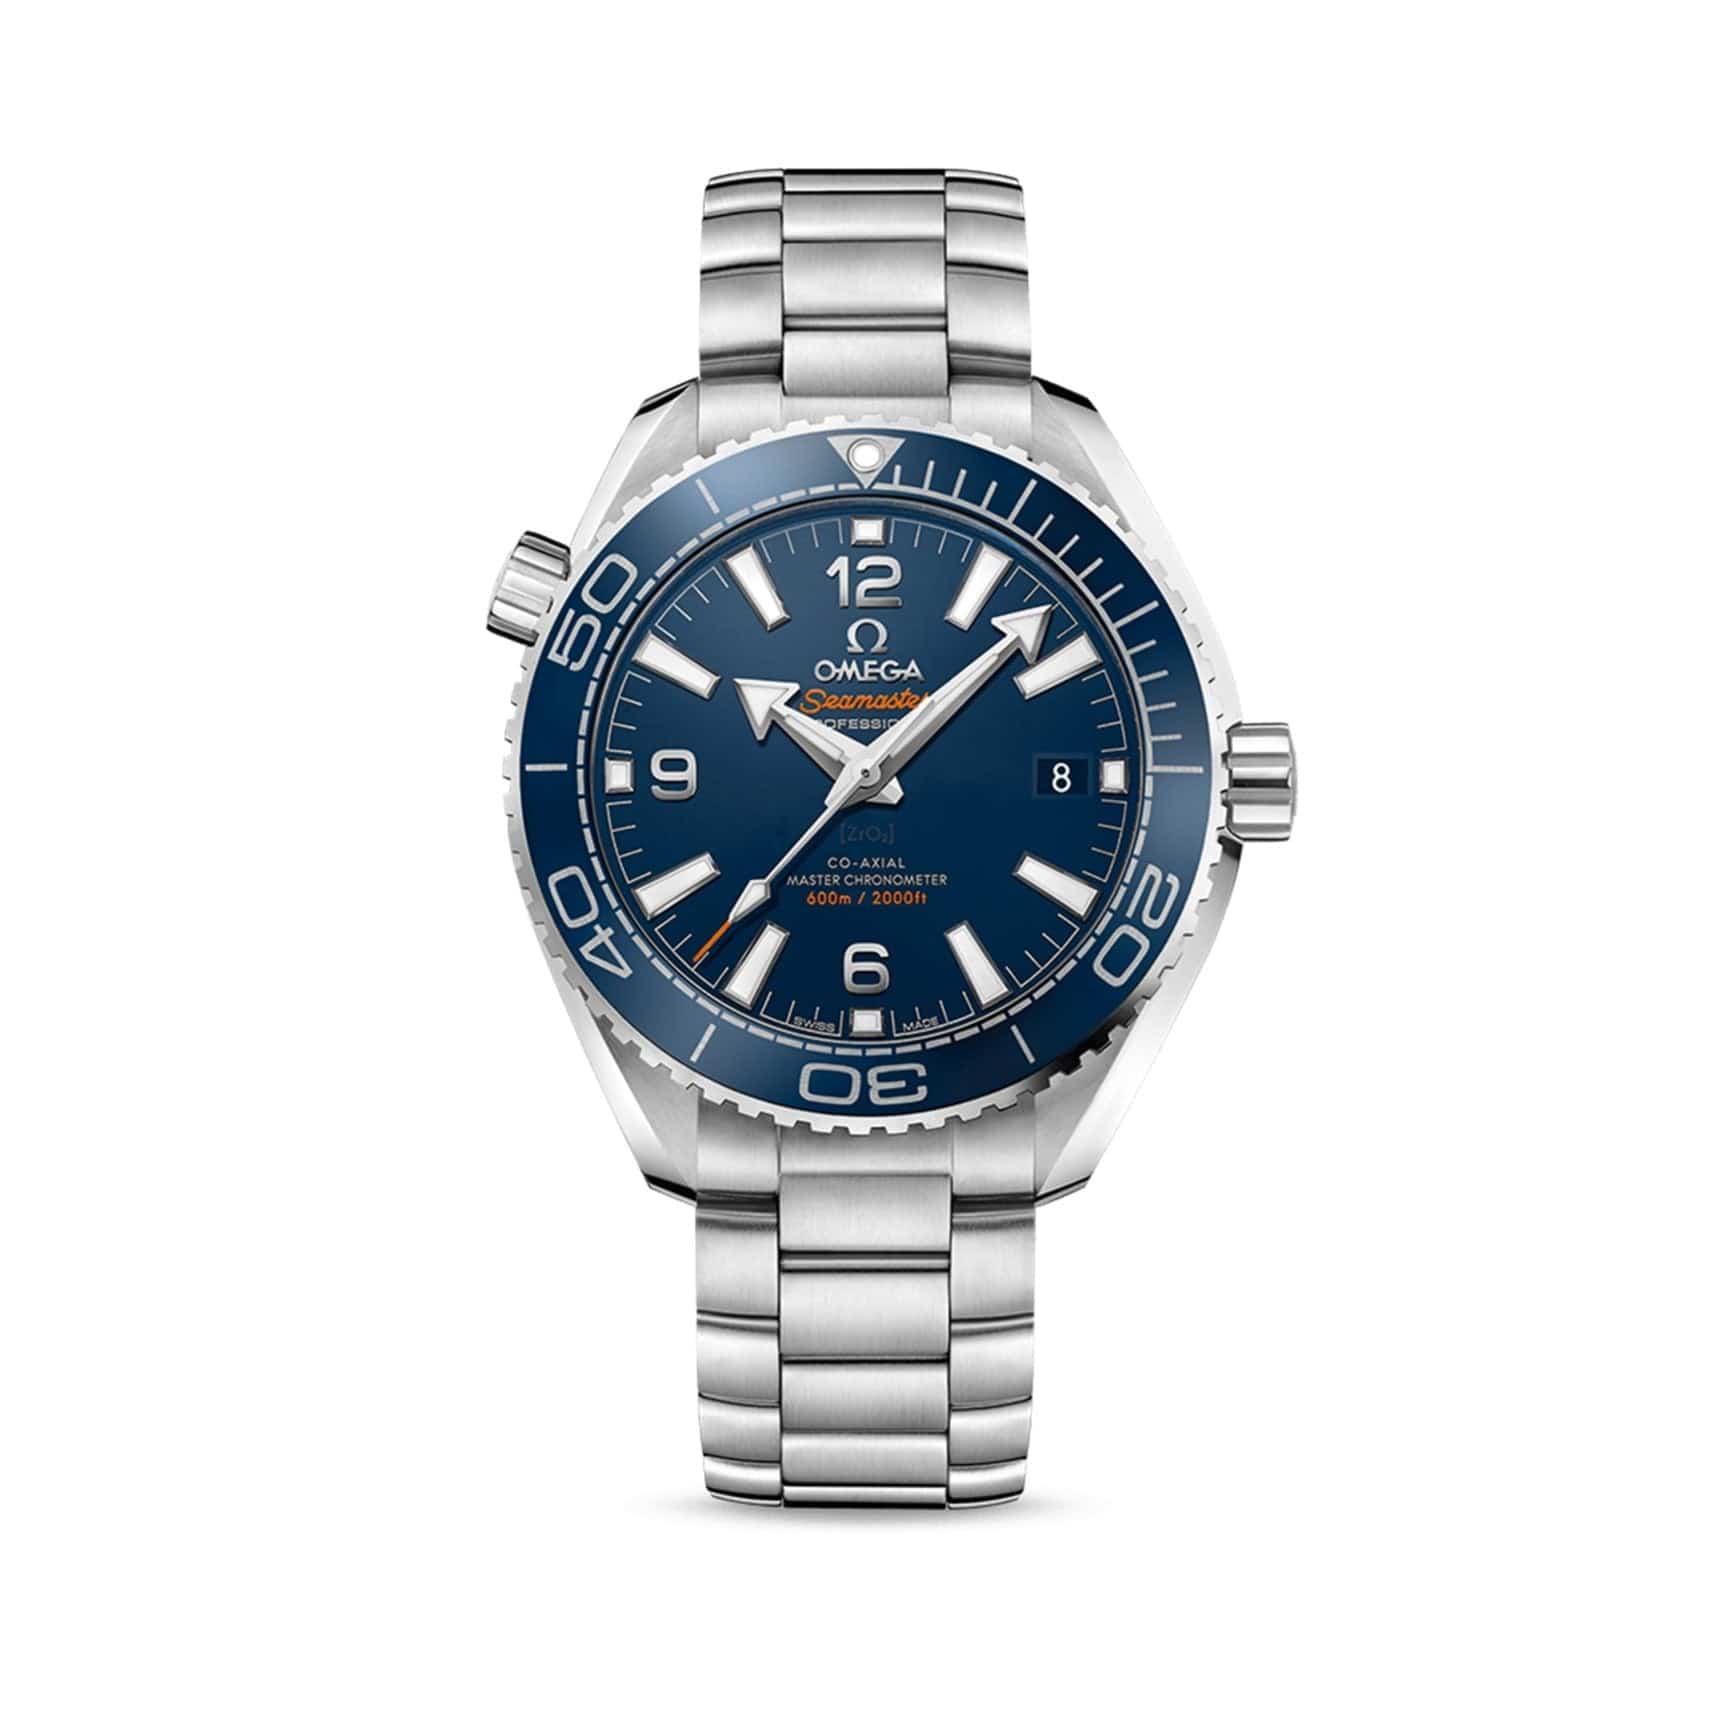 OMEGA Seamaster Planet Ocean 600M Co-Axial Master Chronometer 39.5mm